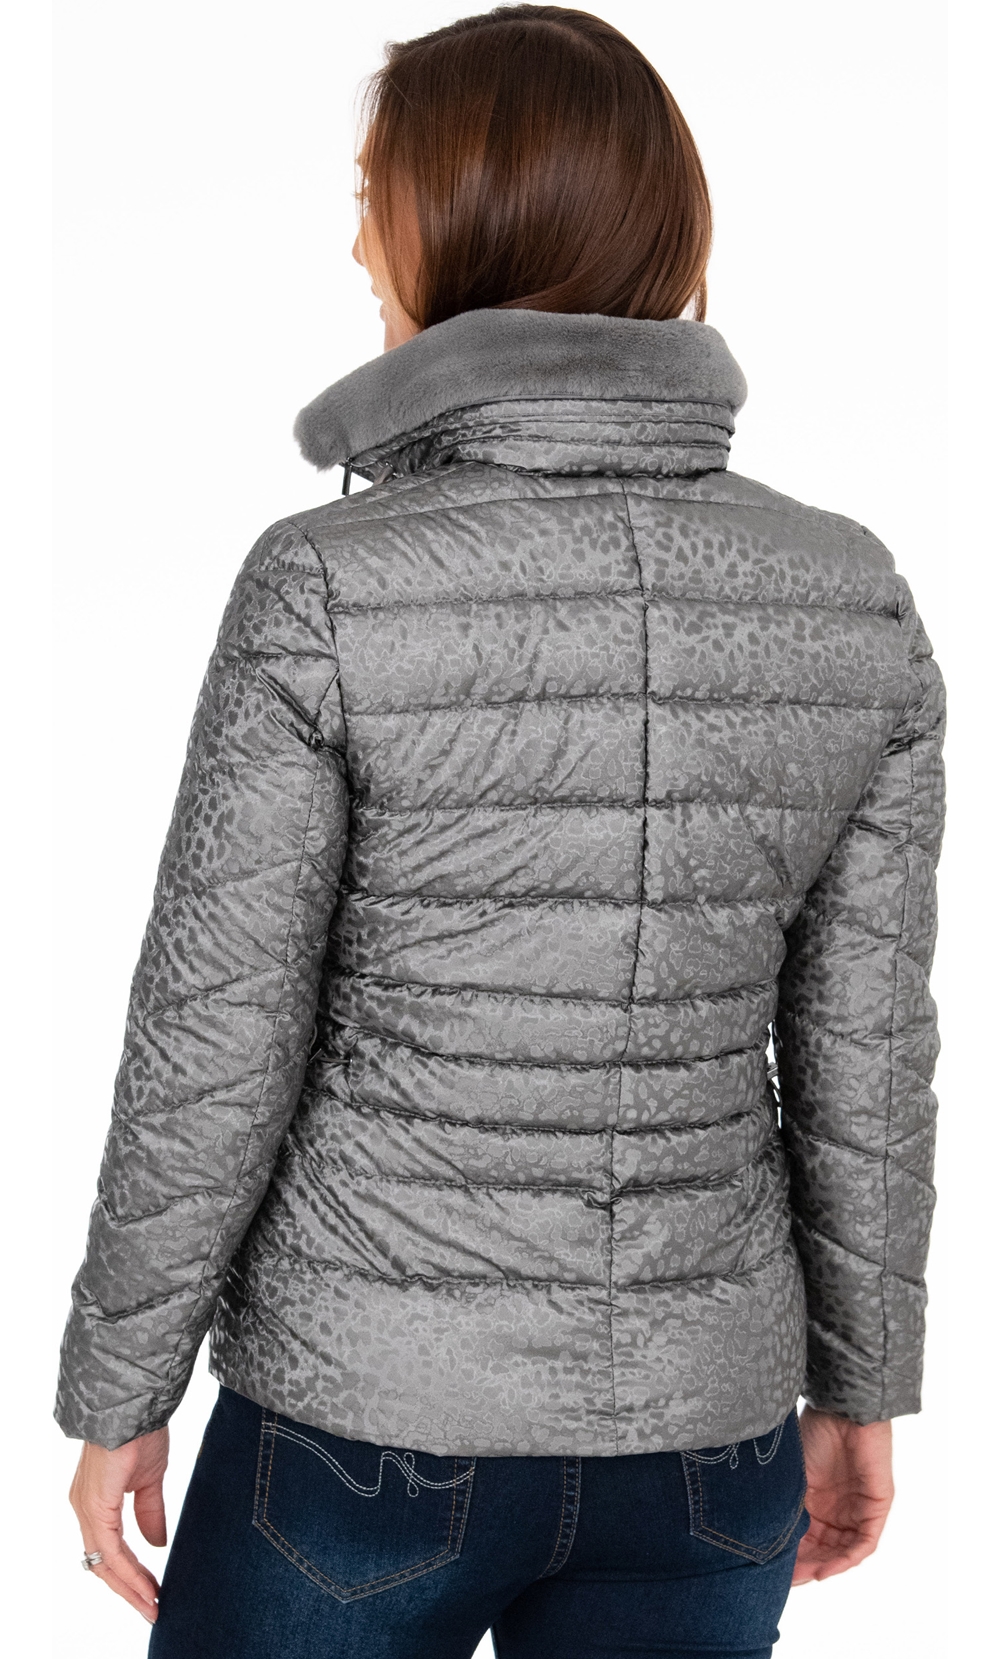 Padded Jacket With Faux Fur Trim